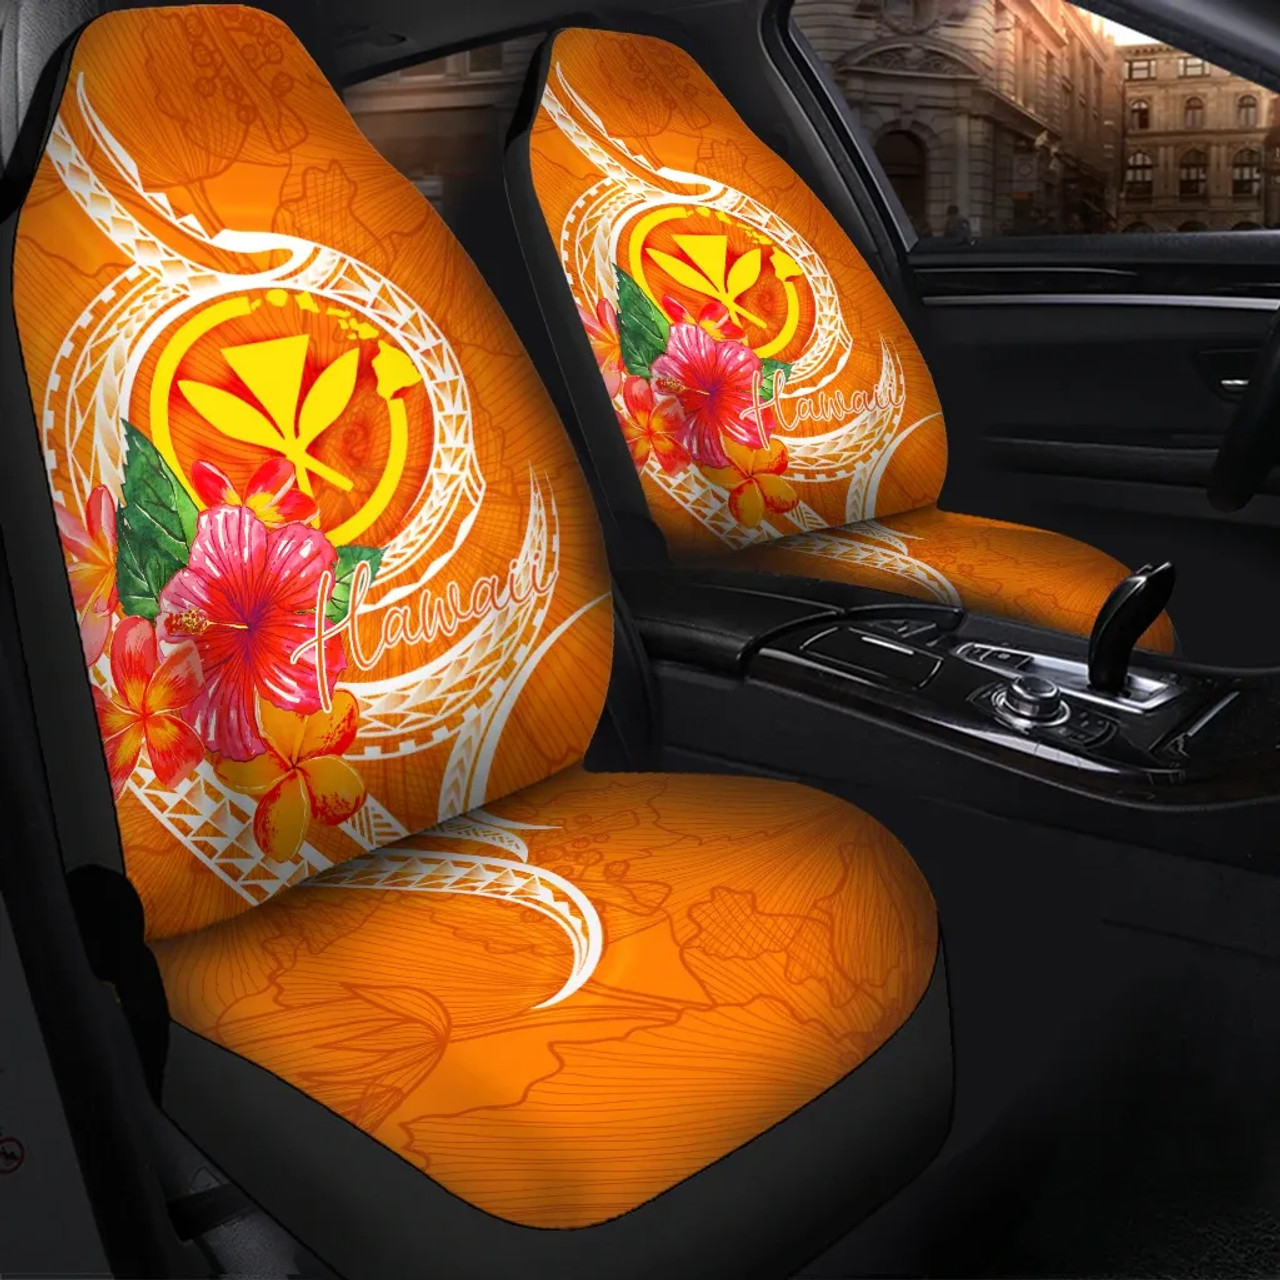 Hawaii Polynesian Car Seat Covers - Orange Floral With Seal